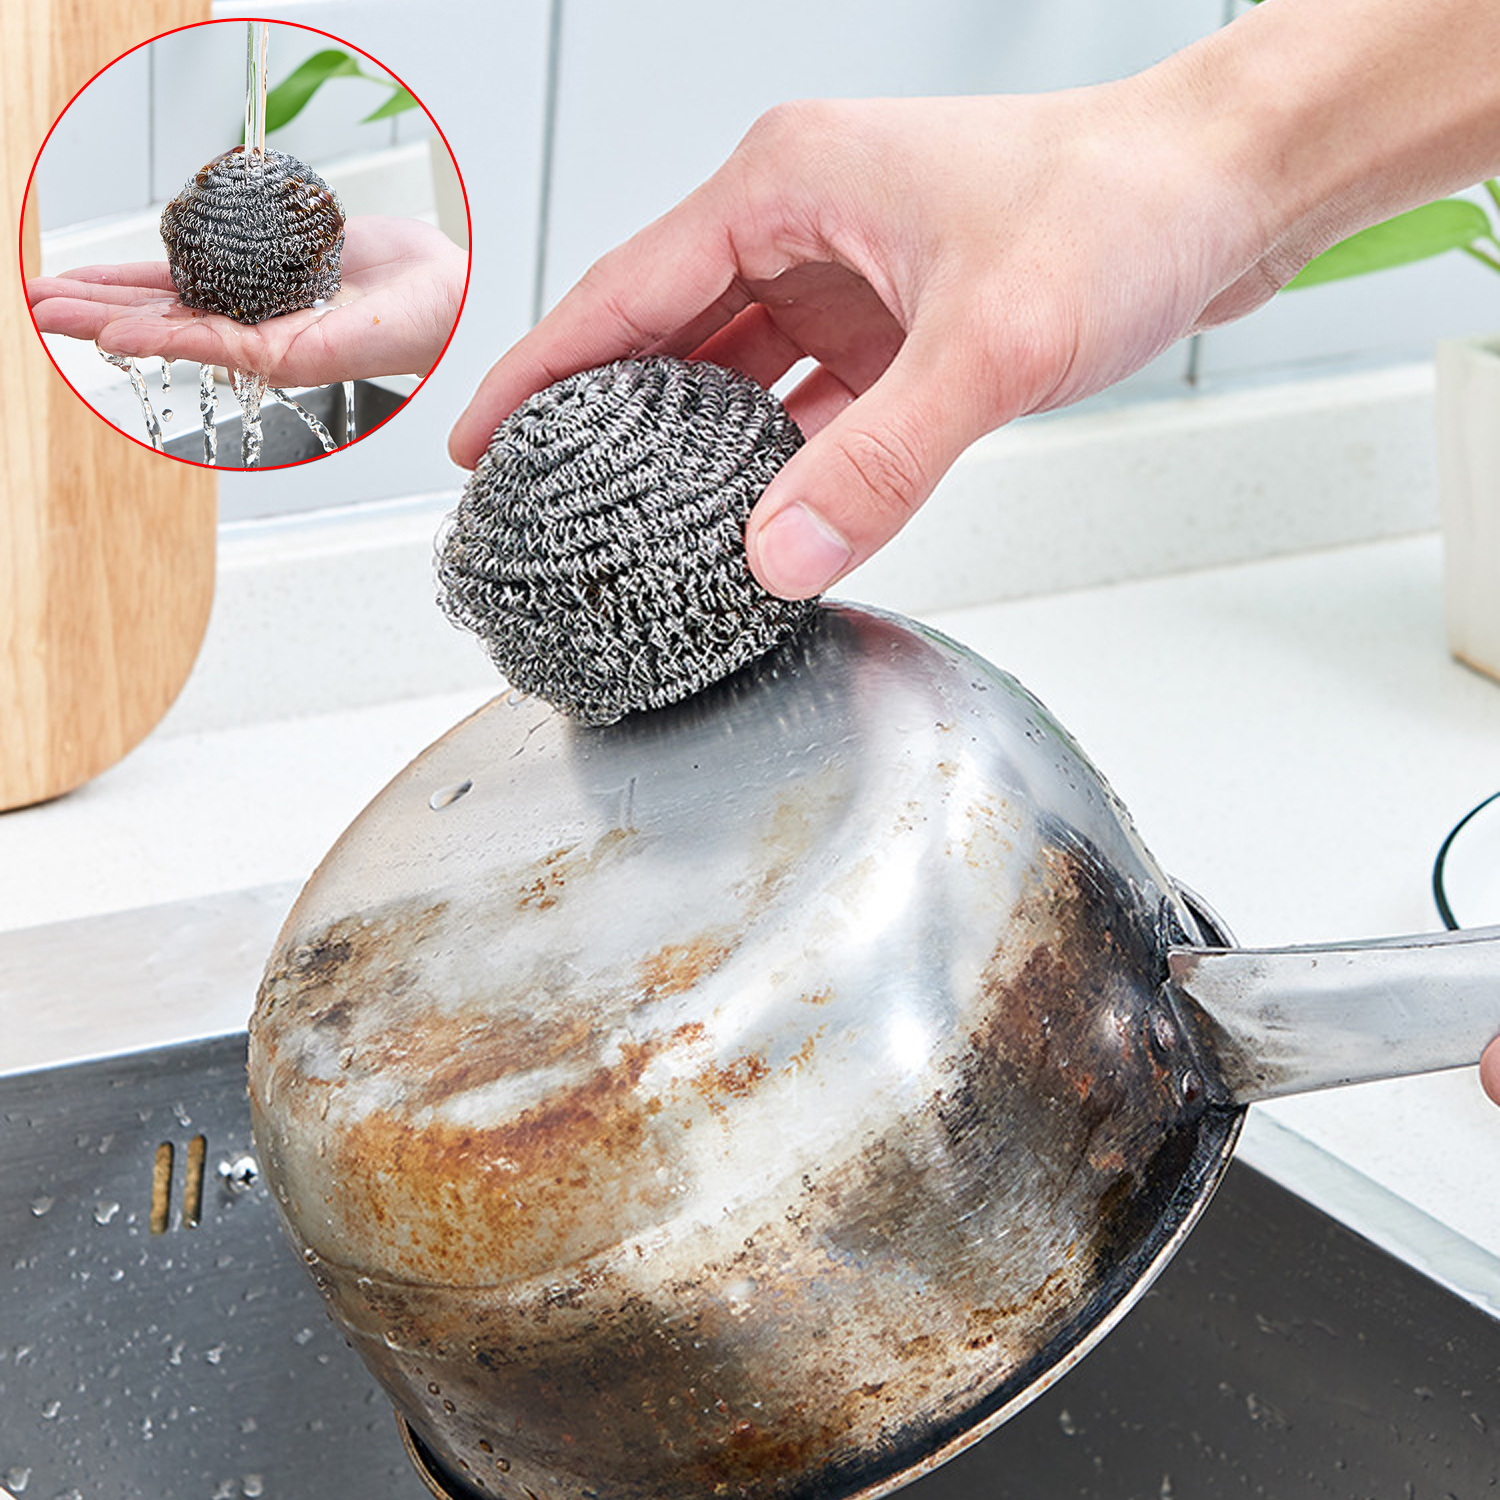 6 Pcs Kitchen Cleaning Stainless Steel 410 Pot Scourer Stainless Steel Pot Scrubber Stainless Steel Cleaning Ball 